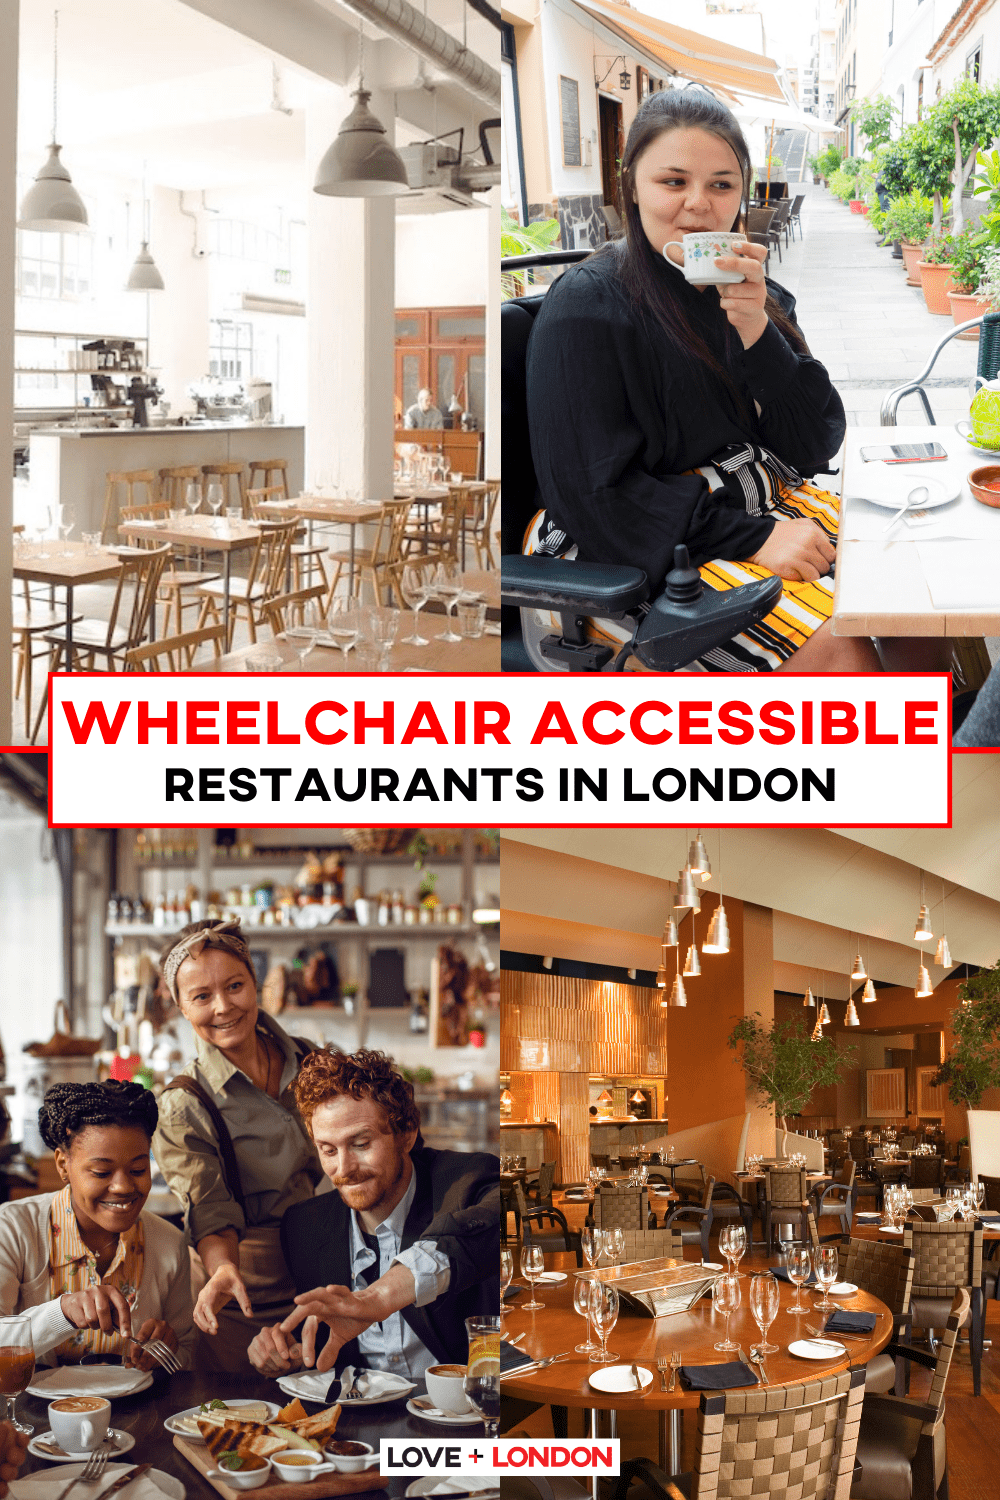 This is a pinterest pin of four images laid out into an even grid design. The images show happy customers dining in restaurants. Two images do not feature customers but show beautiful clean restaurants that are well lit and rustic in aesthetic. In the middle of the pin the text reads: Wheelchair accessible restaurants in London.